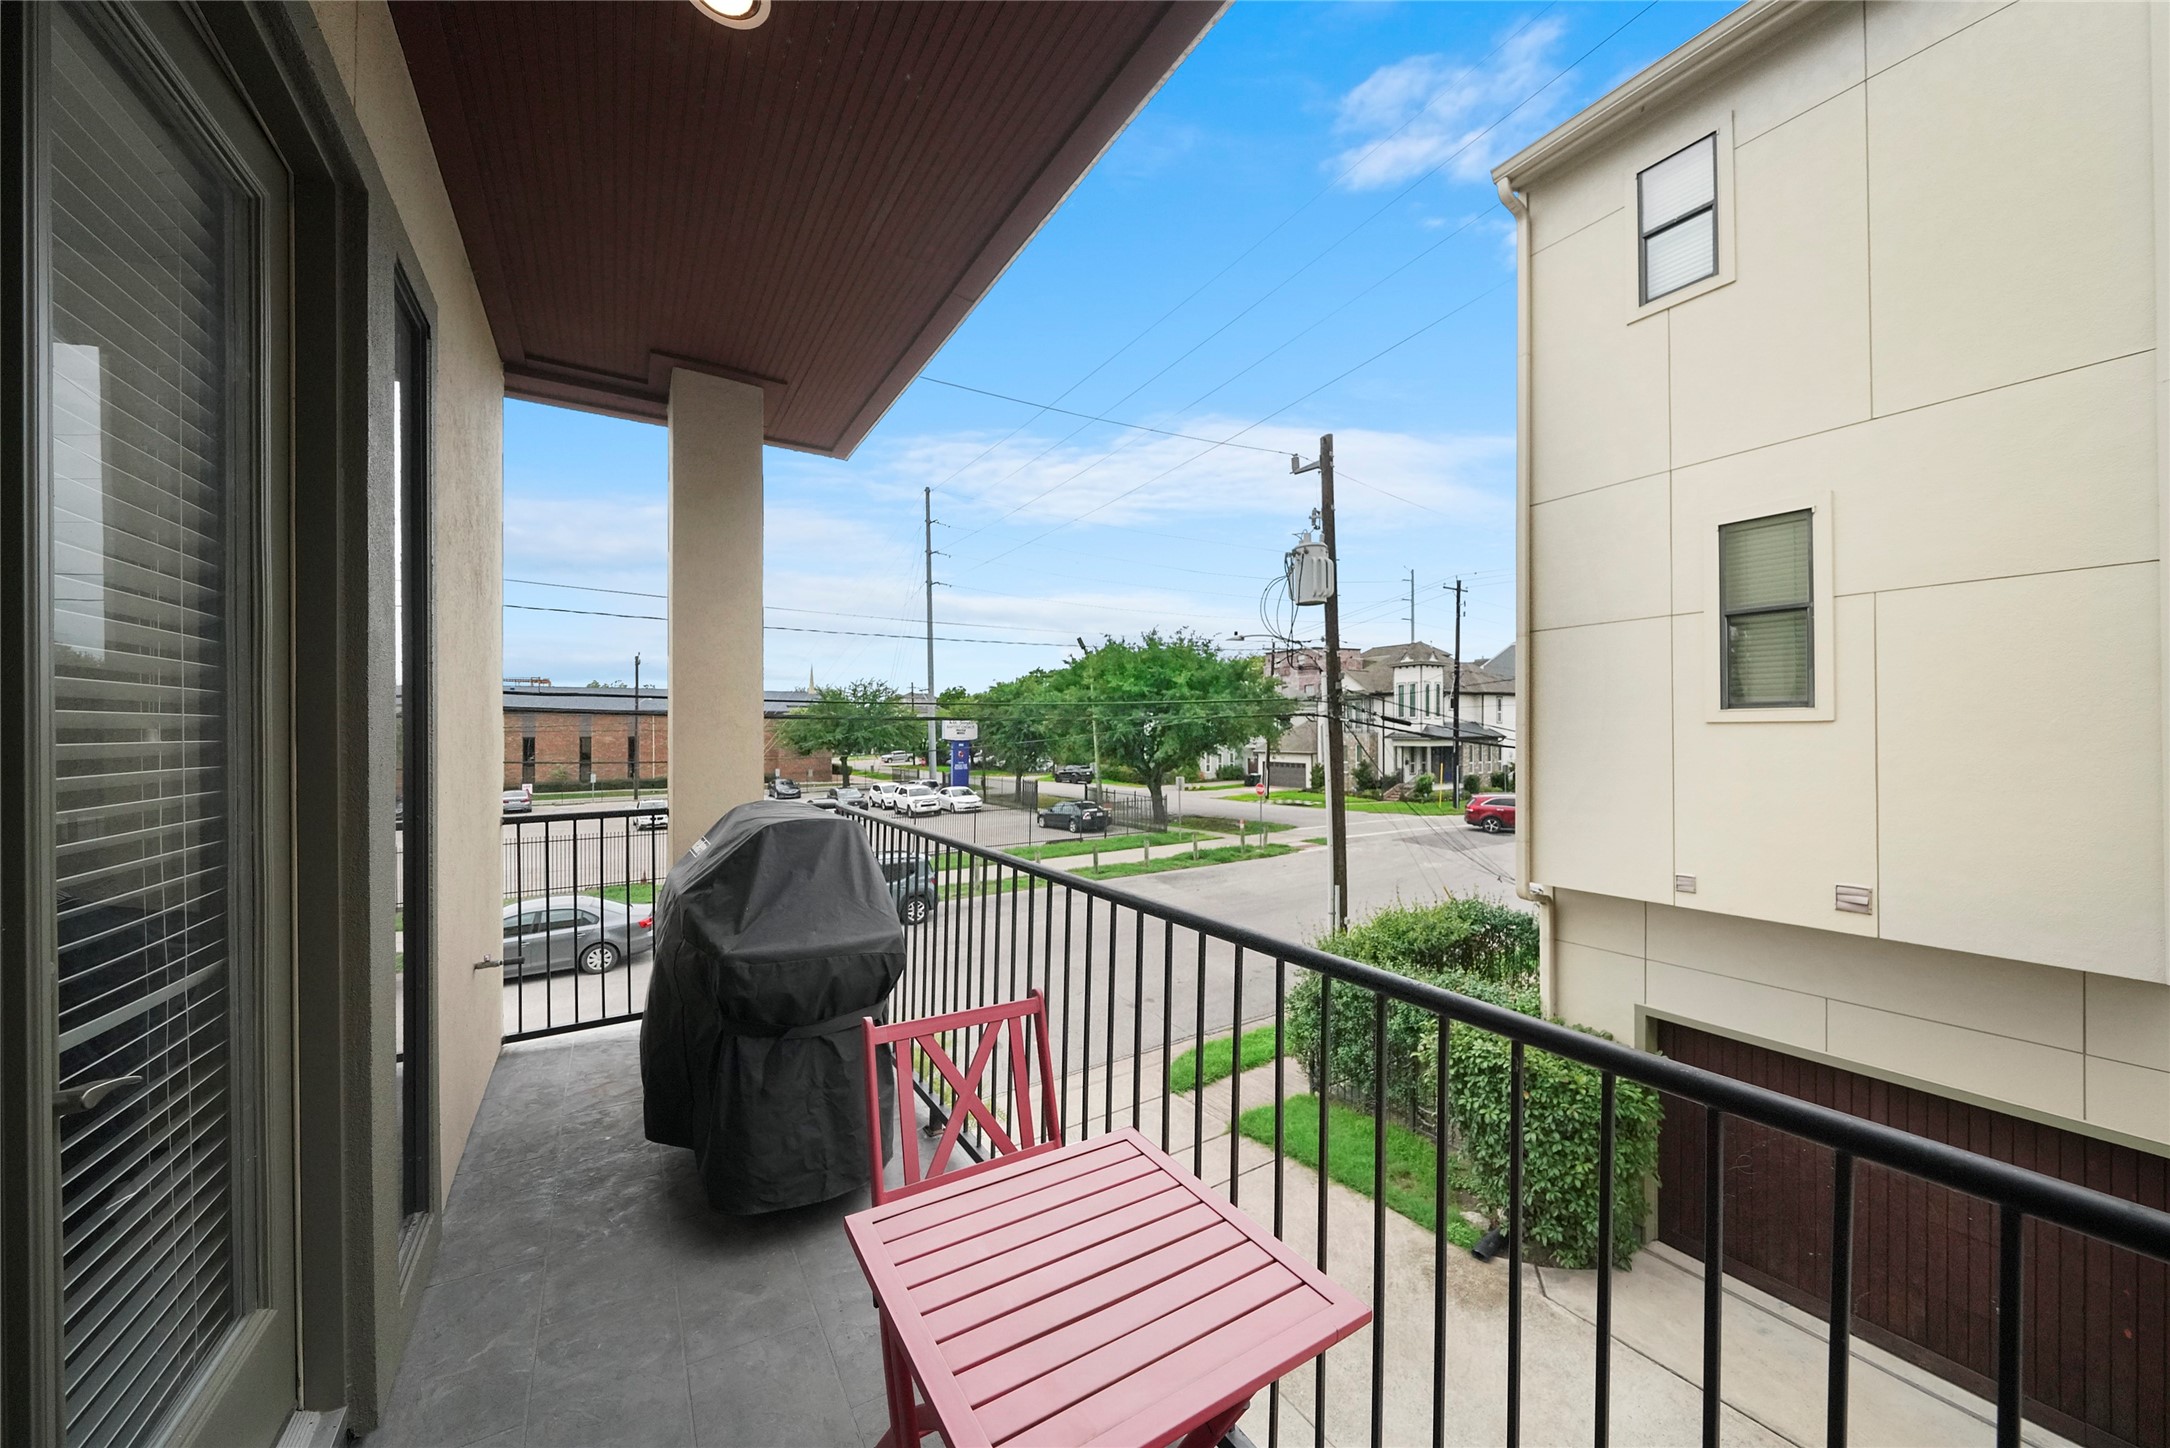 782 Nicholson has 3 balconies.  This one is off the second floor living area, making grilling a meal easy. Morning coffee?  Evening glass of wine ?  Plus a friendly wave to your neighbor.